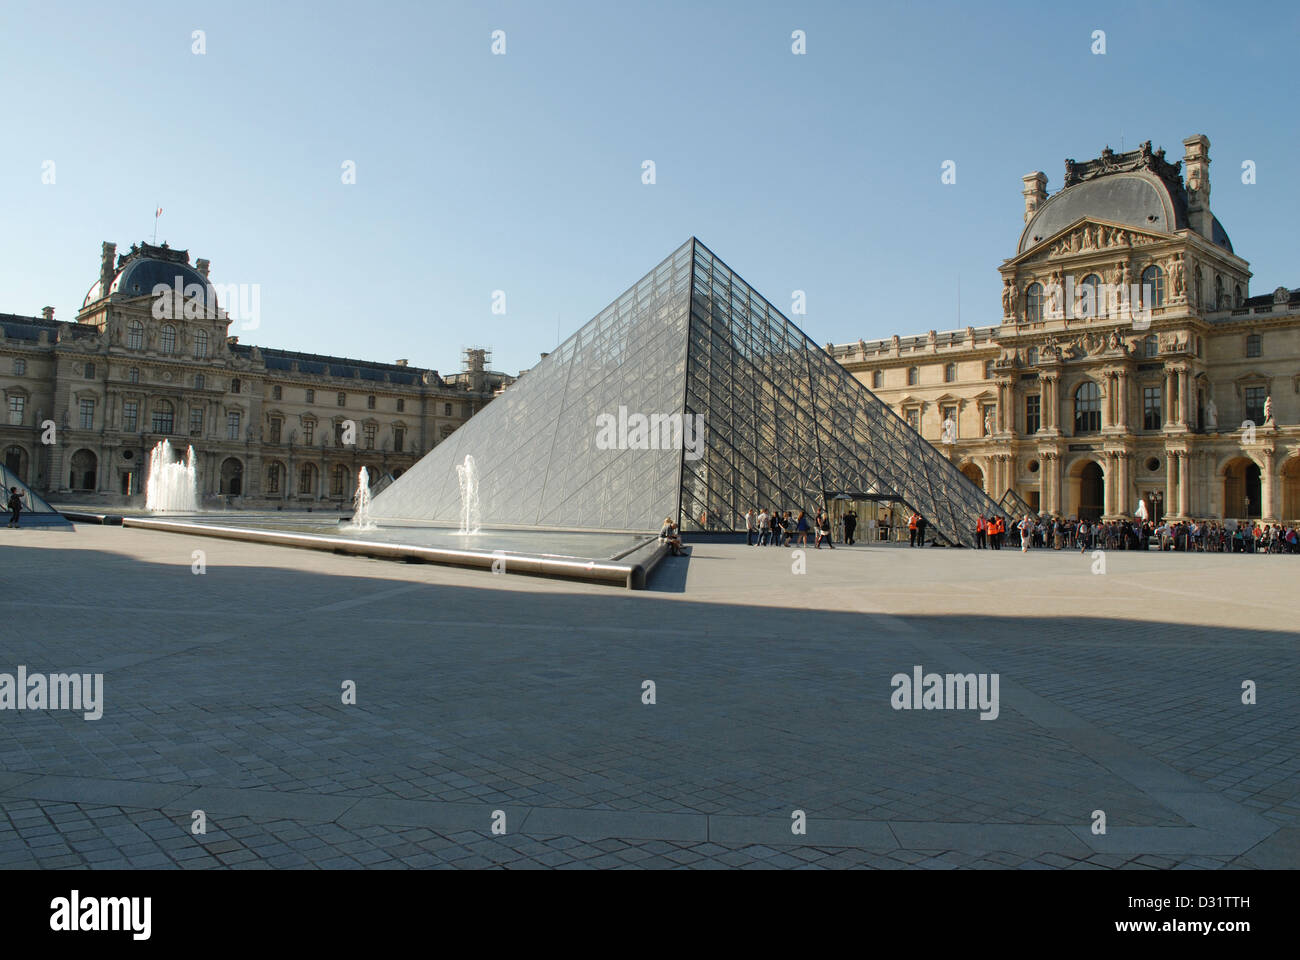 The glass pyramid above the Louvre Museum, Paris, France. Stock Photo